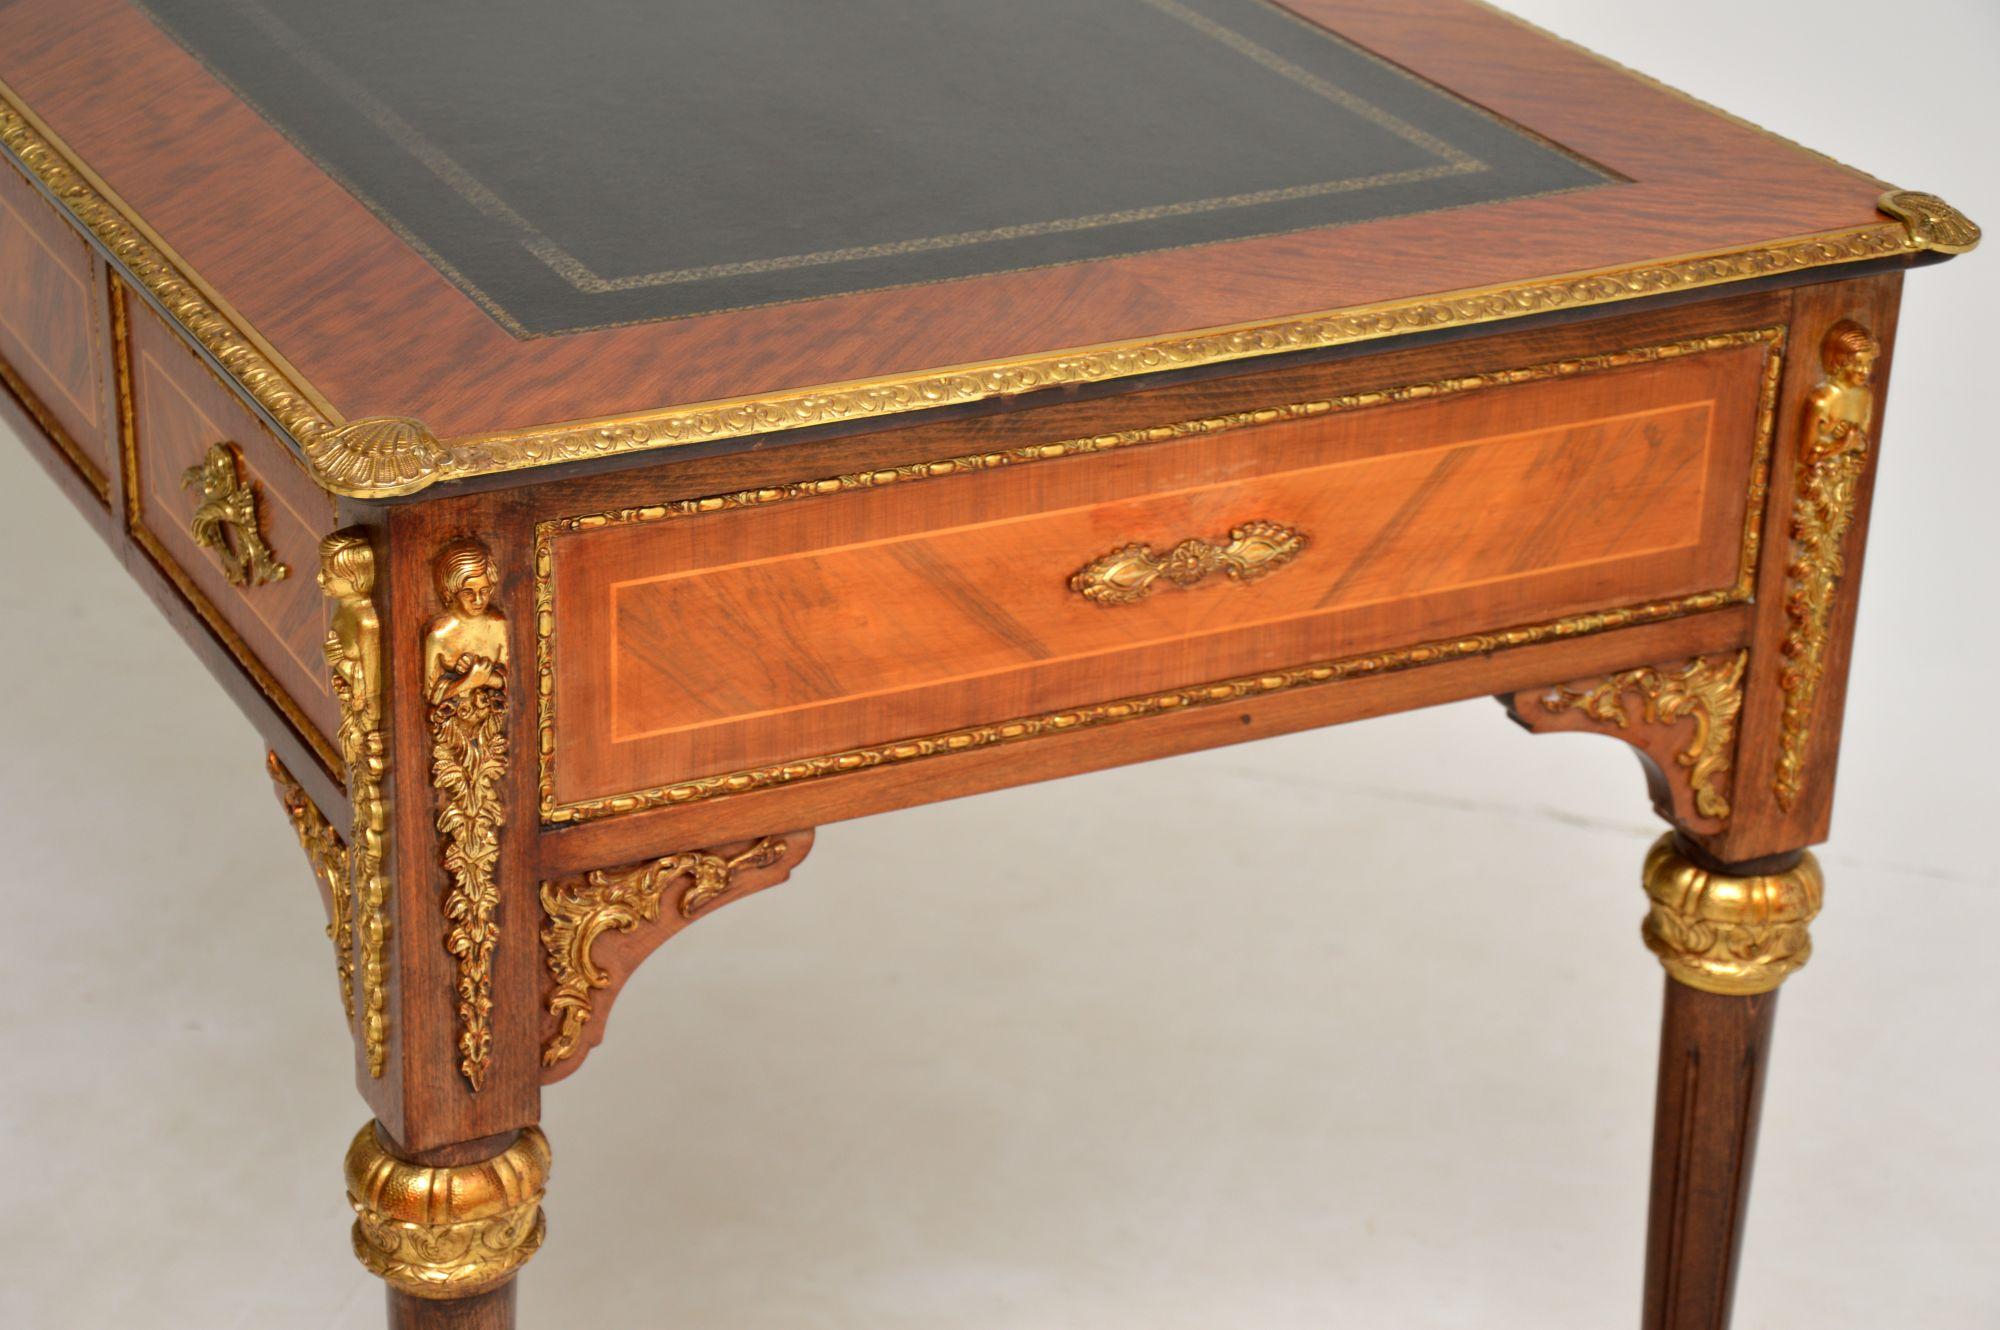 20th Century Antique French Ormolu Mounted Leather Top Desk